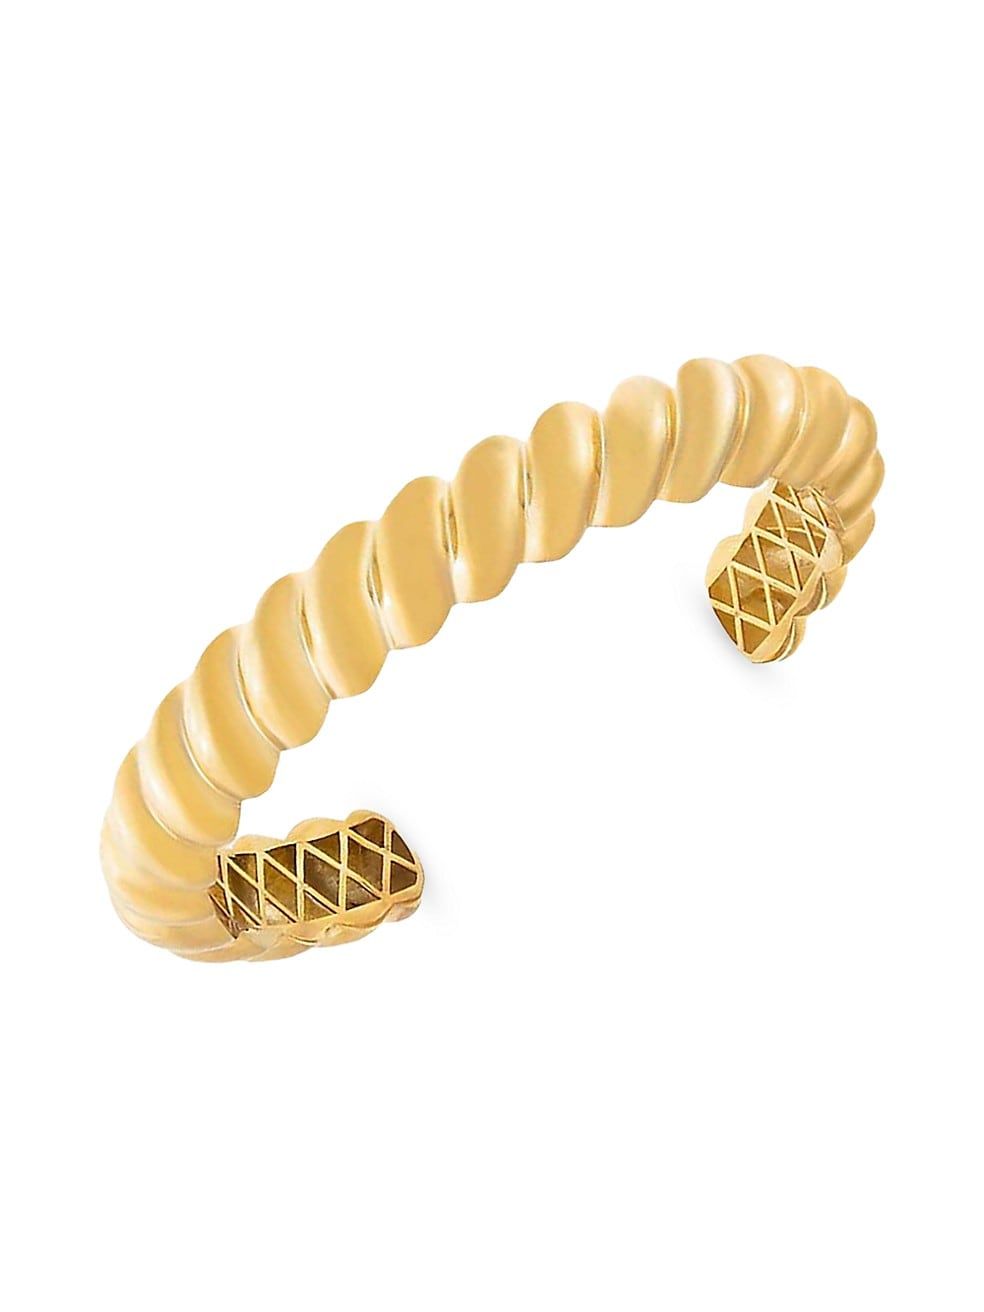 By Adina Eden 14K-Gold-Plated Braided Cuff | Saks Fifth Avenue